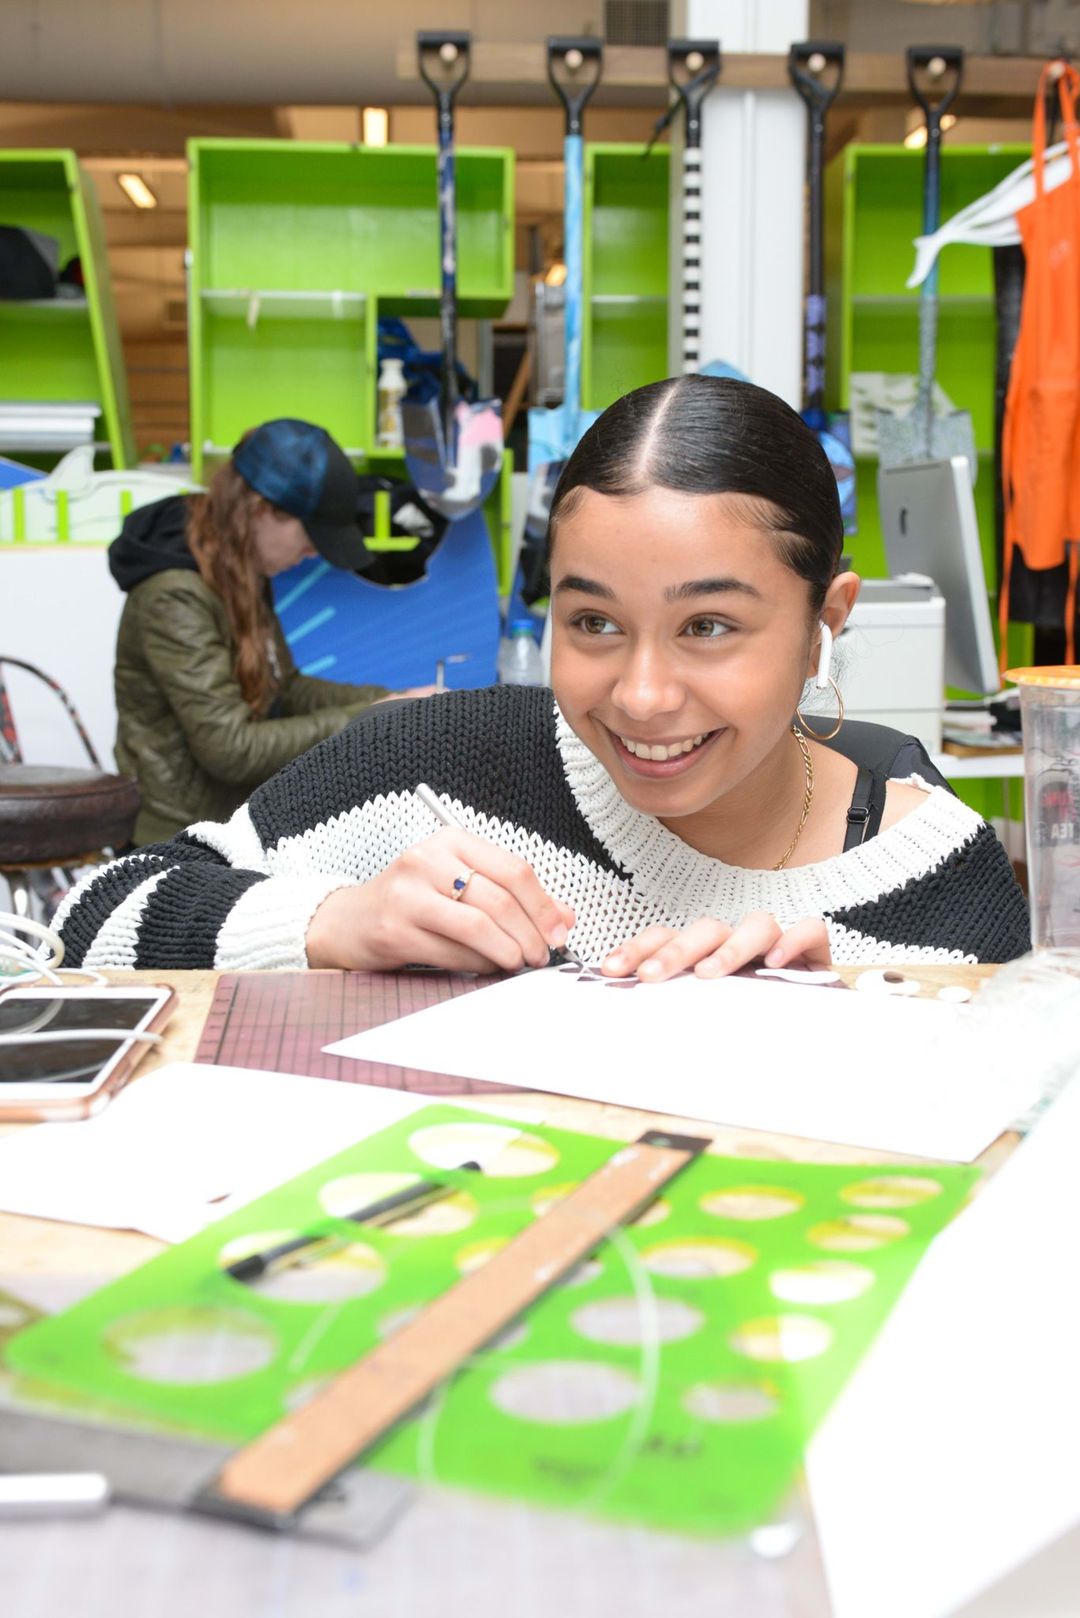 A girl looking up and smiling while cutting paper with a x-acto knife